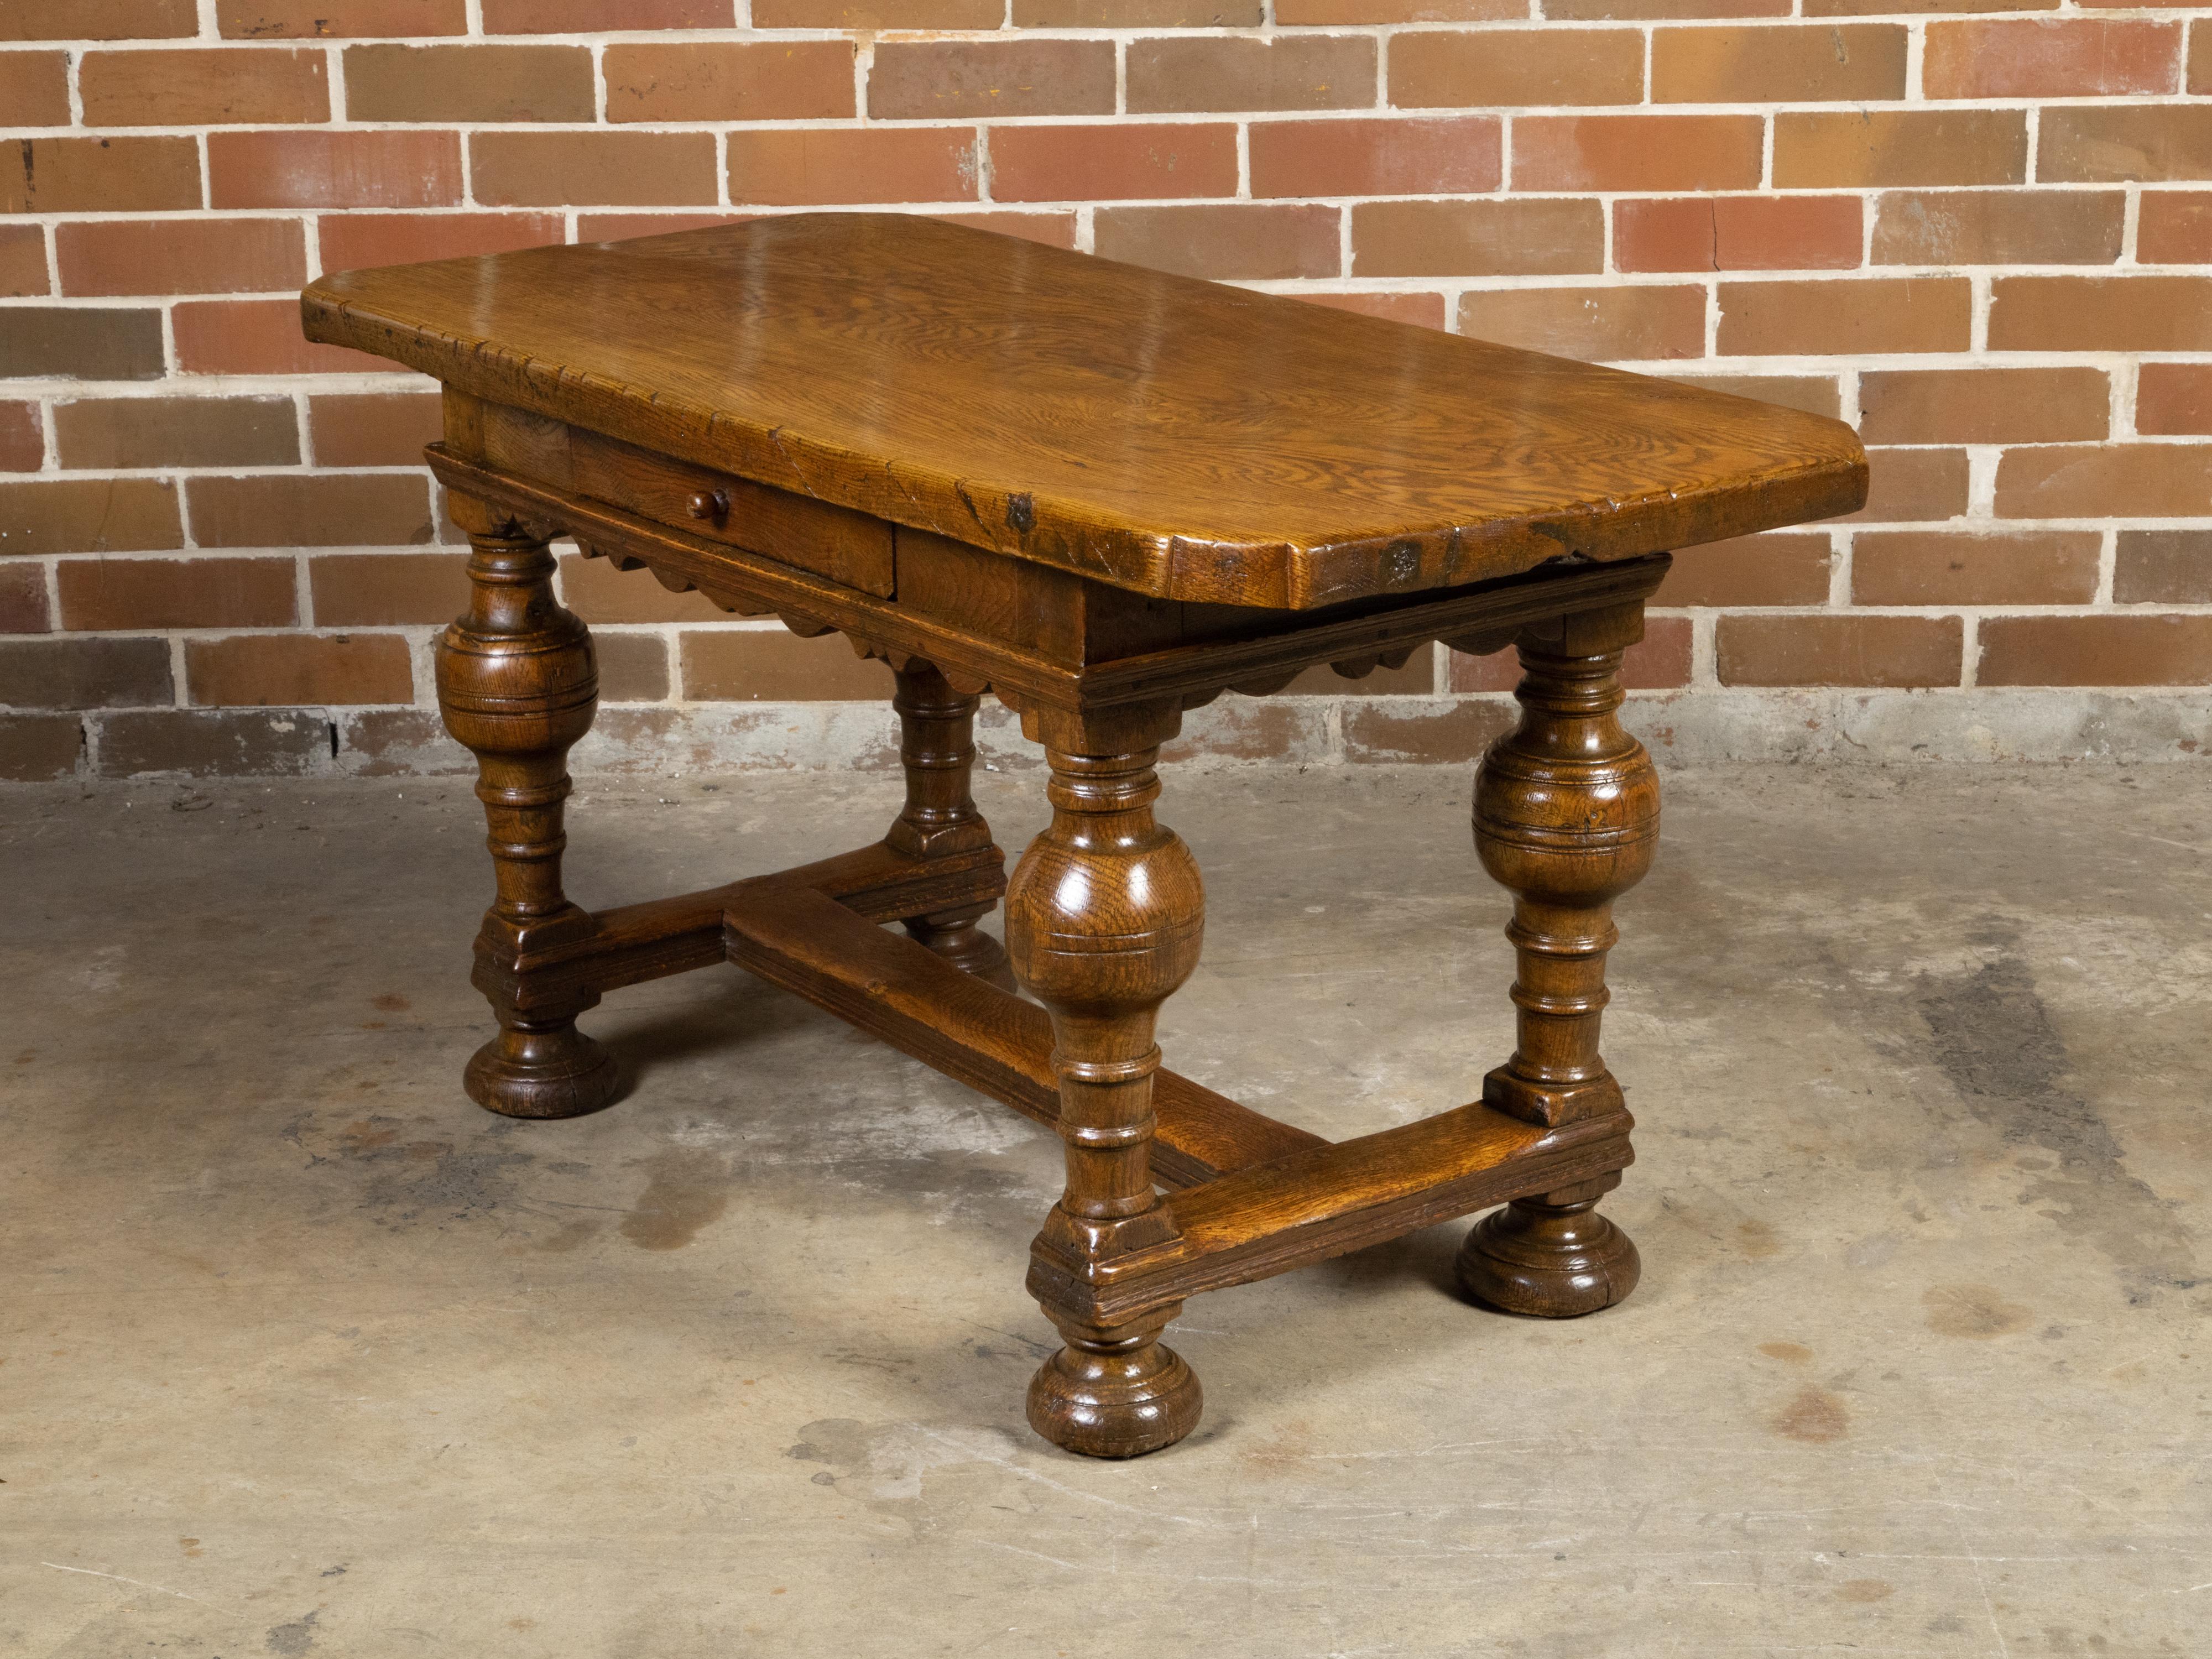 Danish Langeland Late 19th Century Oak Table with Carved Apron and Turned Legs In Good Condition For Sale In Atlanta, GA